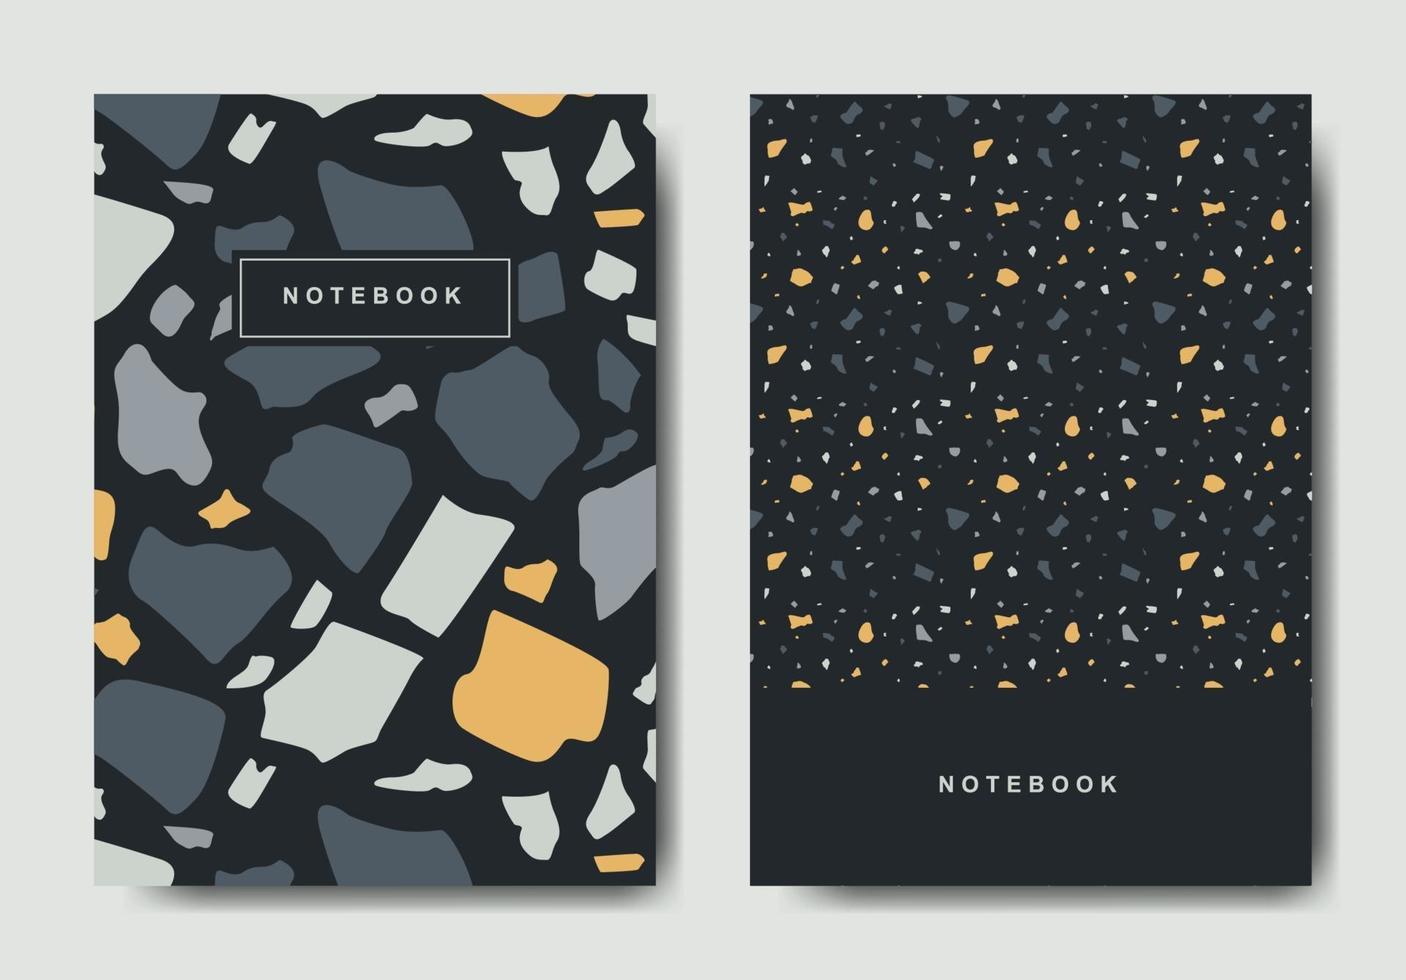 Terrazzo abstract cover page templates. Universal abstract layouts. Applicable for notebooks, planners, brochures, books, catalogs vector